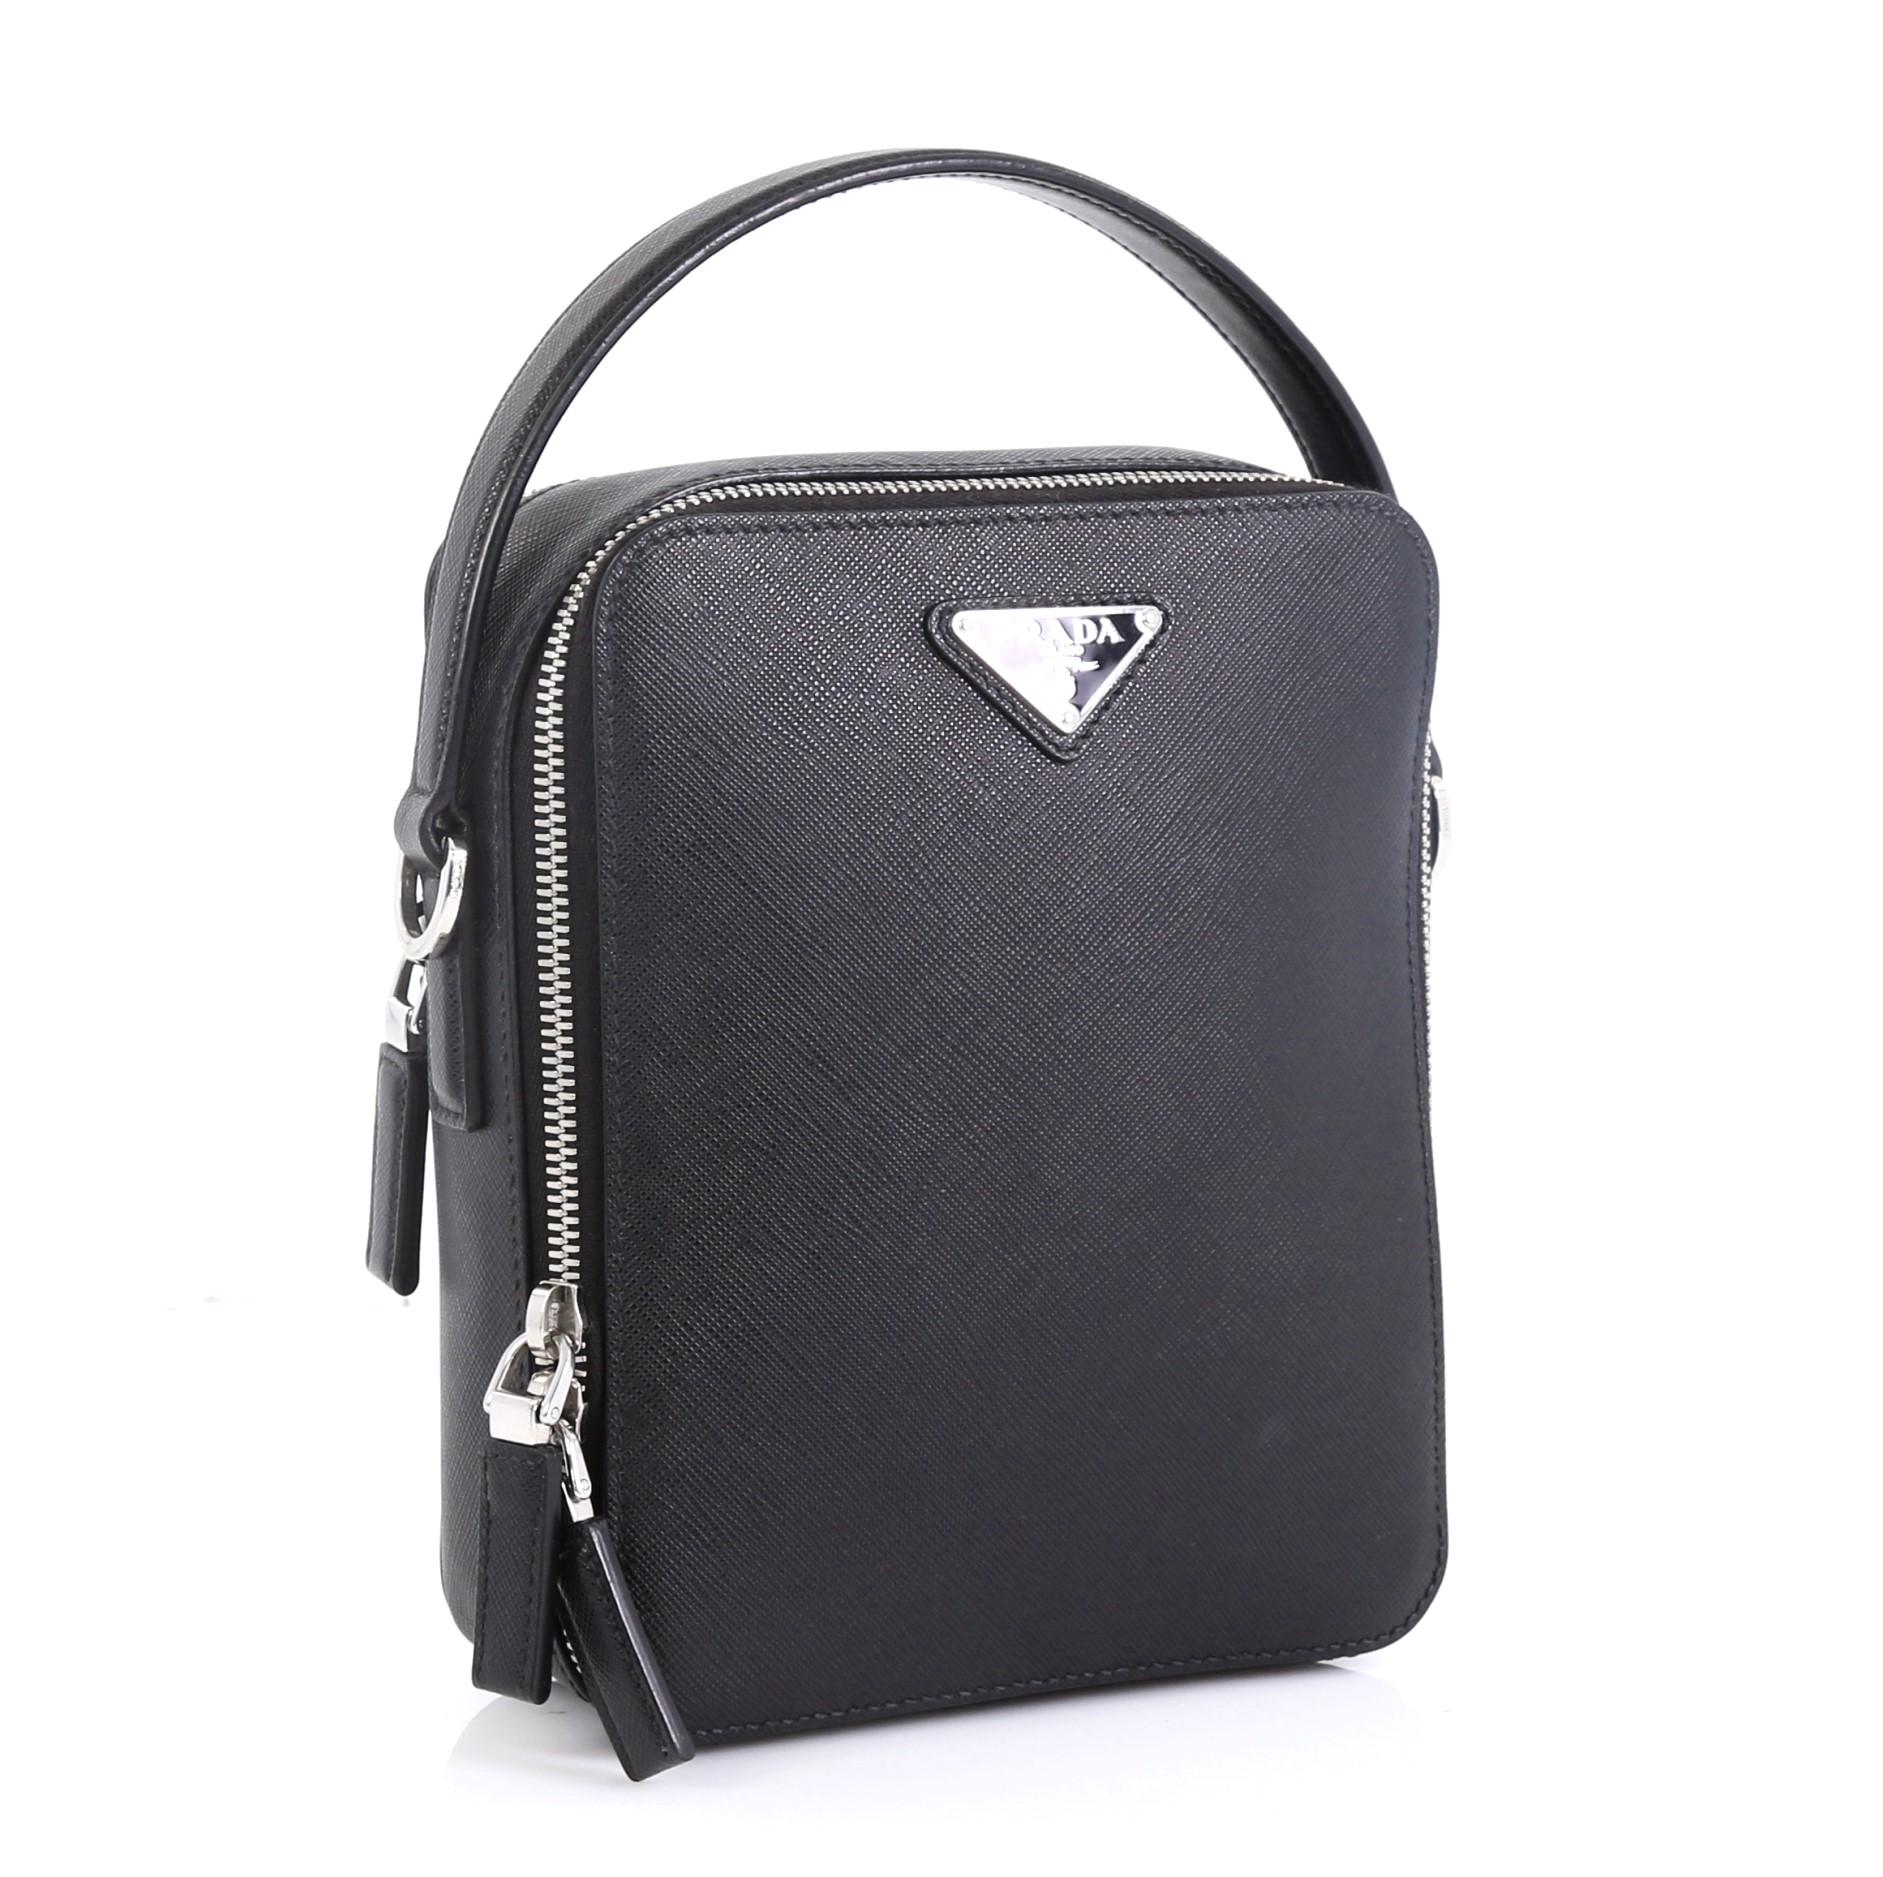 This Prada Brique Crossbody Bag Saffiano Leather Medium, crafted in black leather, features a leather top handle, Prada logo and silver-tone hardware. Its zip closures opens to a black fabric interior with zip pocket. 

Estimated Retail Price: